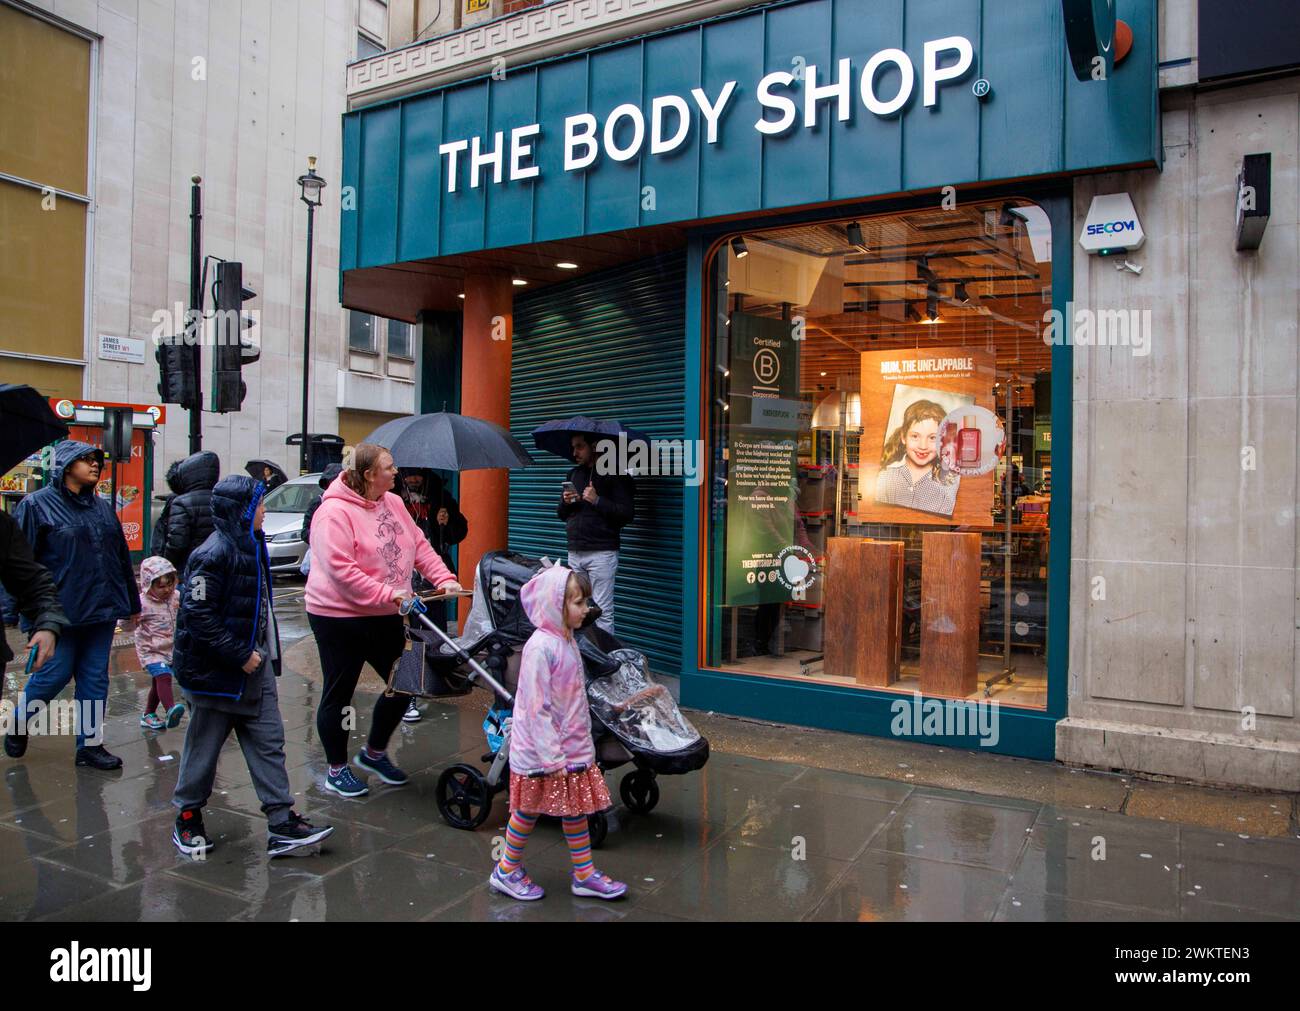 London, UK 22 Feb 2024 Body Shop in Bond Street that has closed. The Body Shop, Founded by Anita Roddick, entered administration on 13 February 2024. The Body Shop describes itself as a one-stop-shop for all things skincare, haircare, bath & body and self-love. It sells beauty bproducts that pride themselves on being ethically sourced. The Body Shop is set to close nearly half of its 198 shops across the UK. Fouir shopos in London are closing immediately, Anita Roddick, human rights activist and environmental campaigner, opened her first shop in Brighton in 1976. Stock Photo